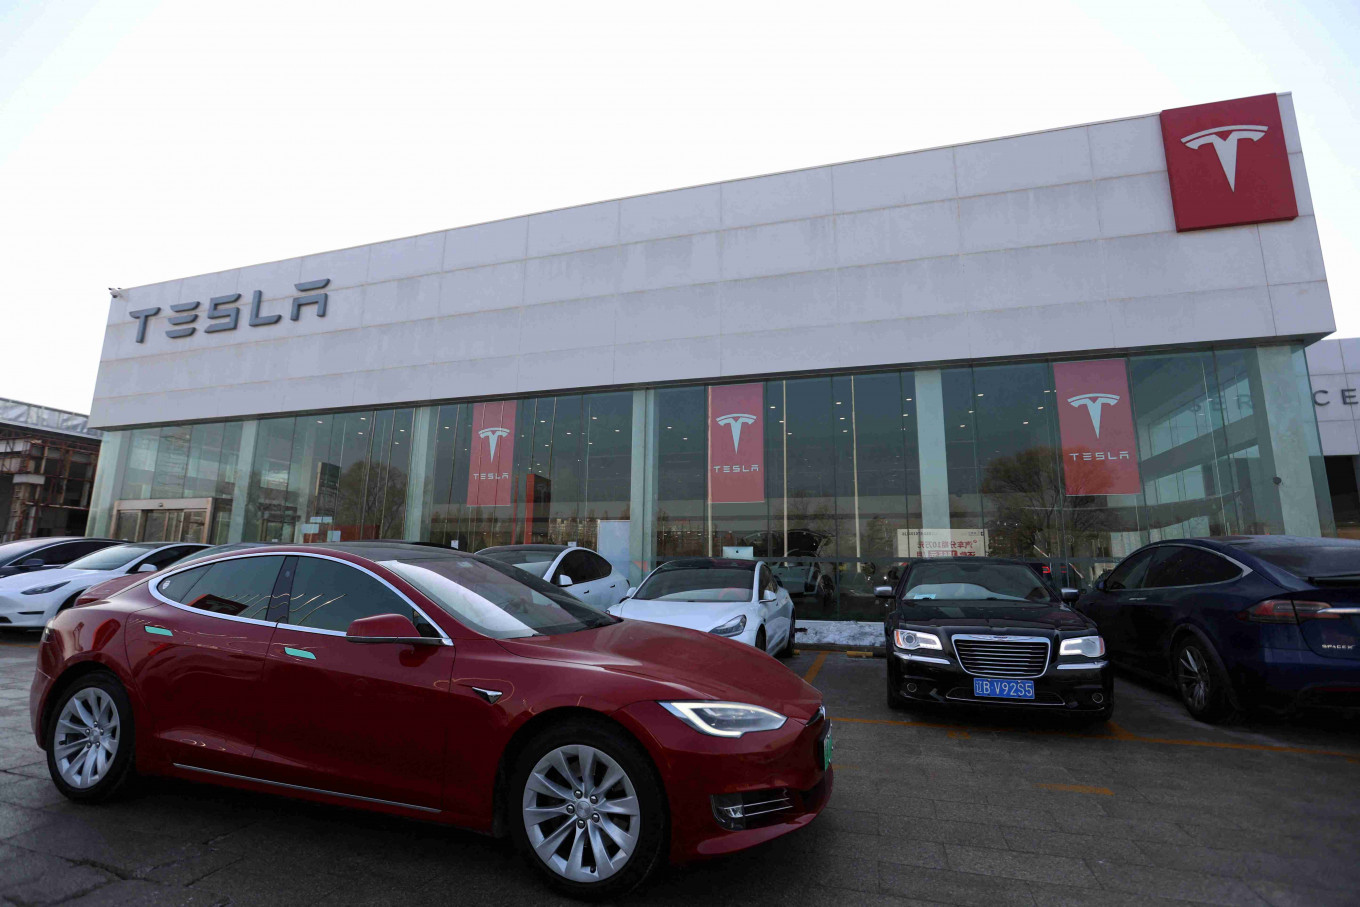 Tesla Slashes Prices on Popular Models What's Behind the Big Discounts This Week